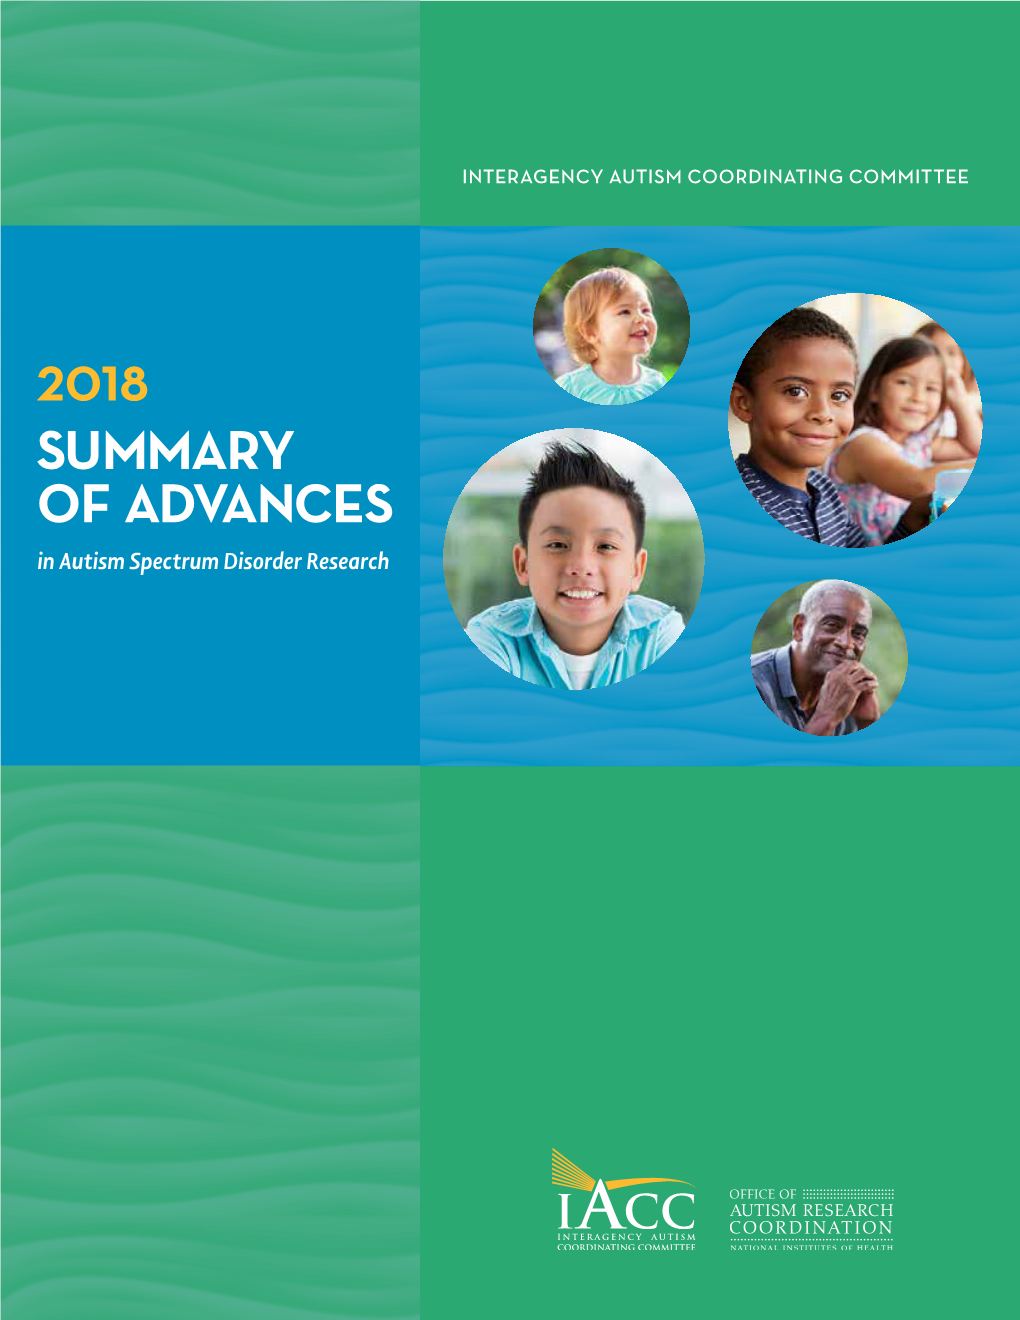 2018 SUMMARY of ADVANCES in Autism Spectrum Disorder Research INTERAGENCY AUTISM COORDINATING COMMITTEE